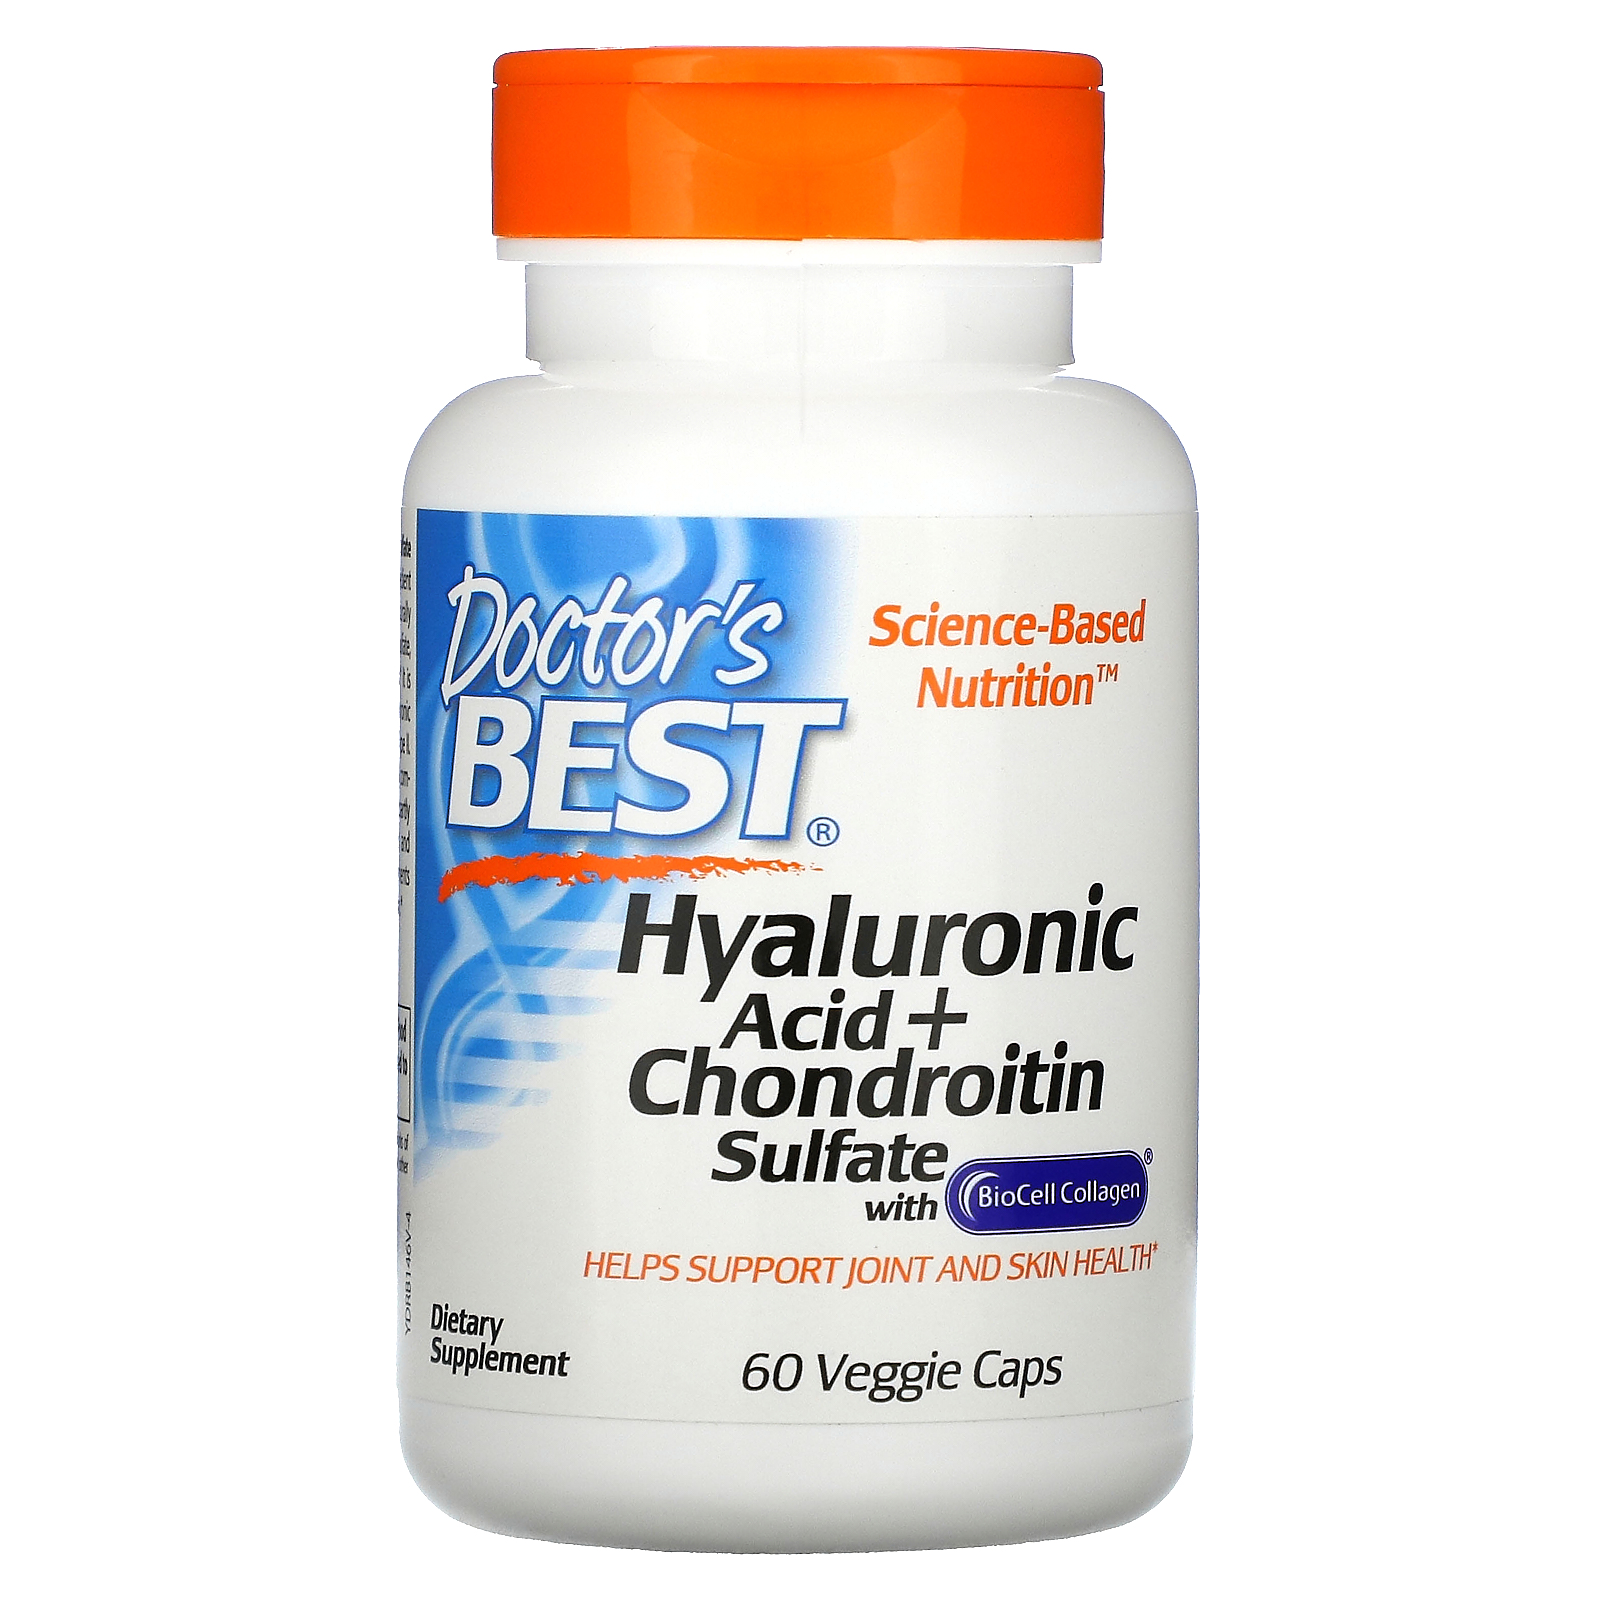 Doctors Best Hyaluronic Acid + Chondroitin Sulfate 60 Capsules